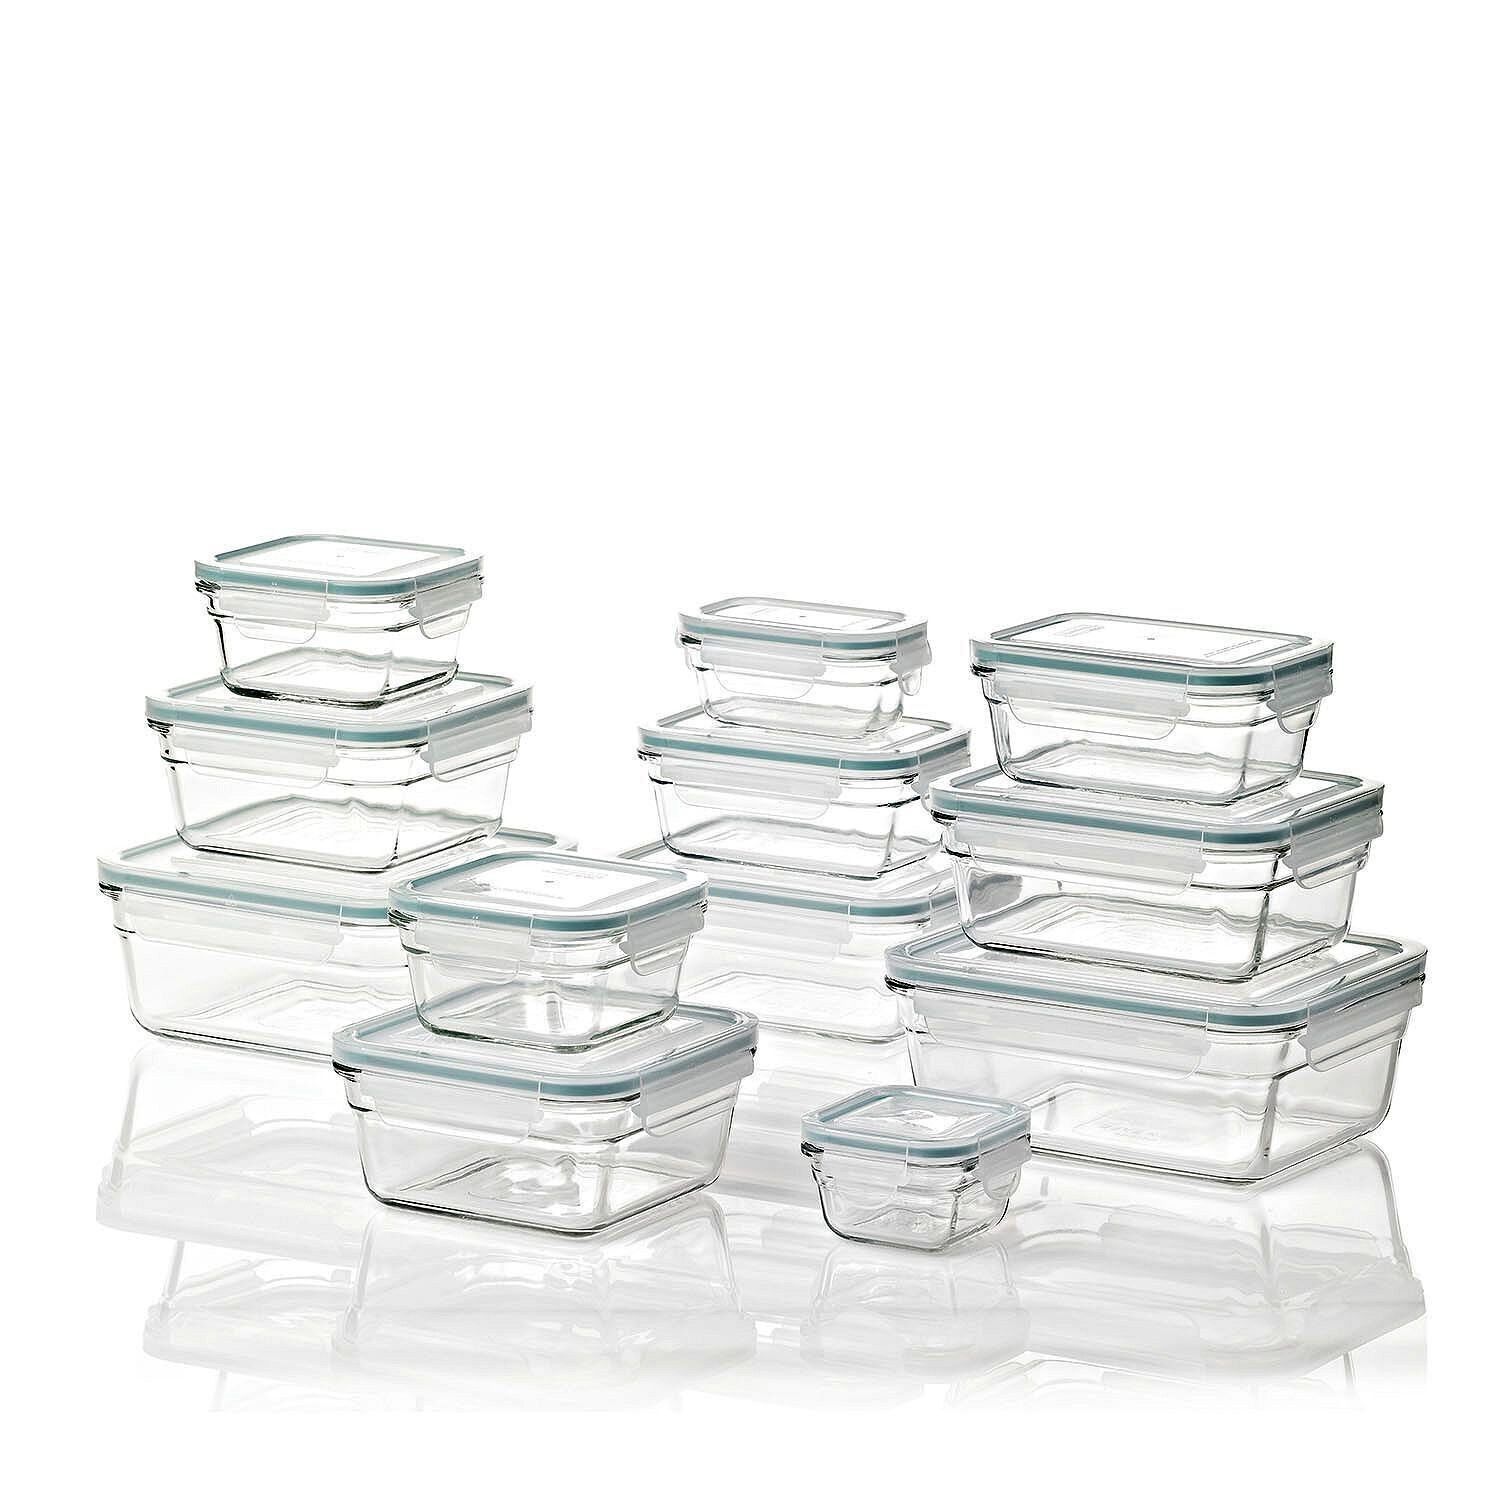 Glasslock 24 Piece Oven and Microwave Safe Glass Food Storage and